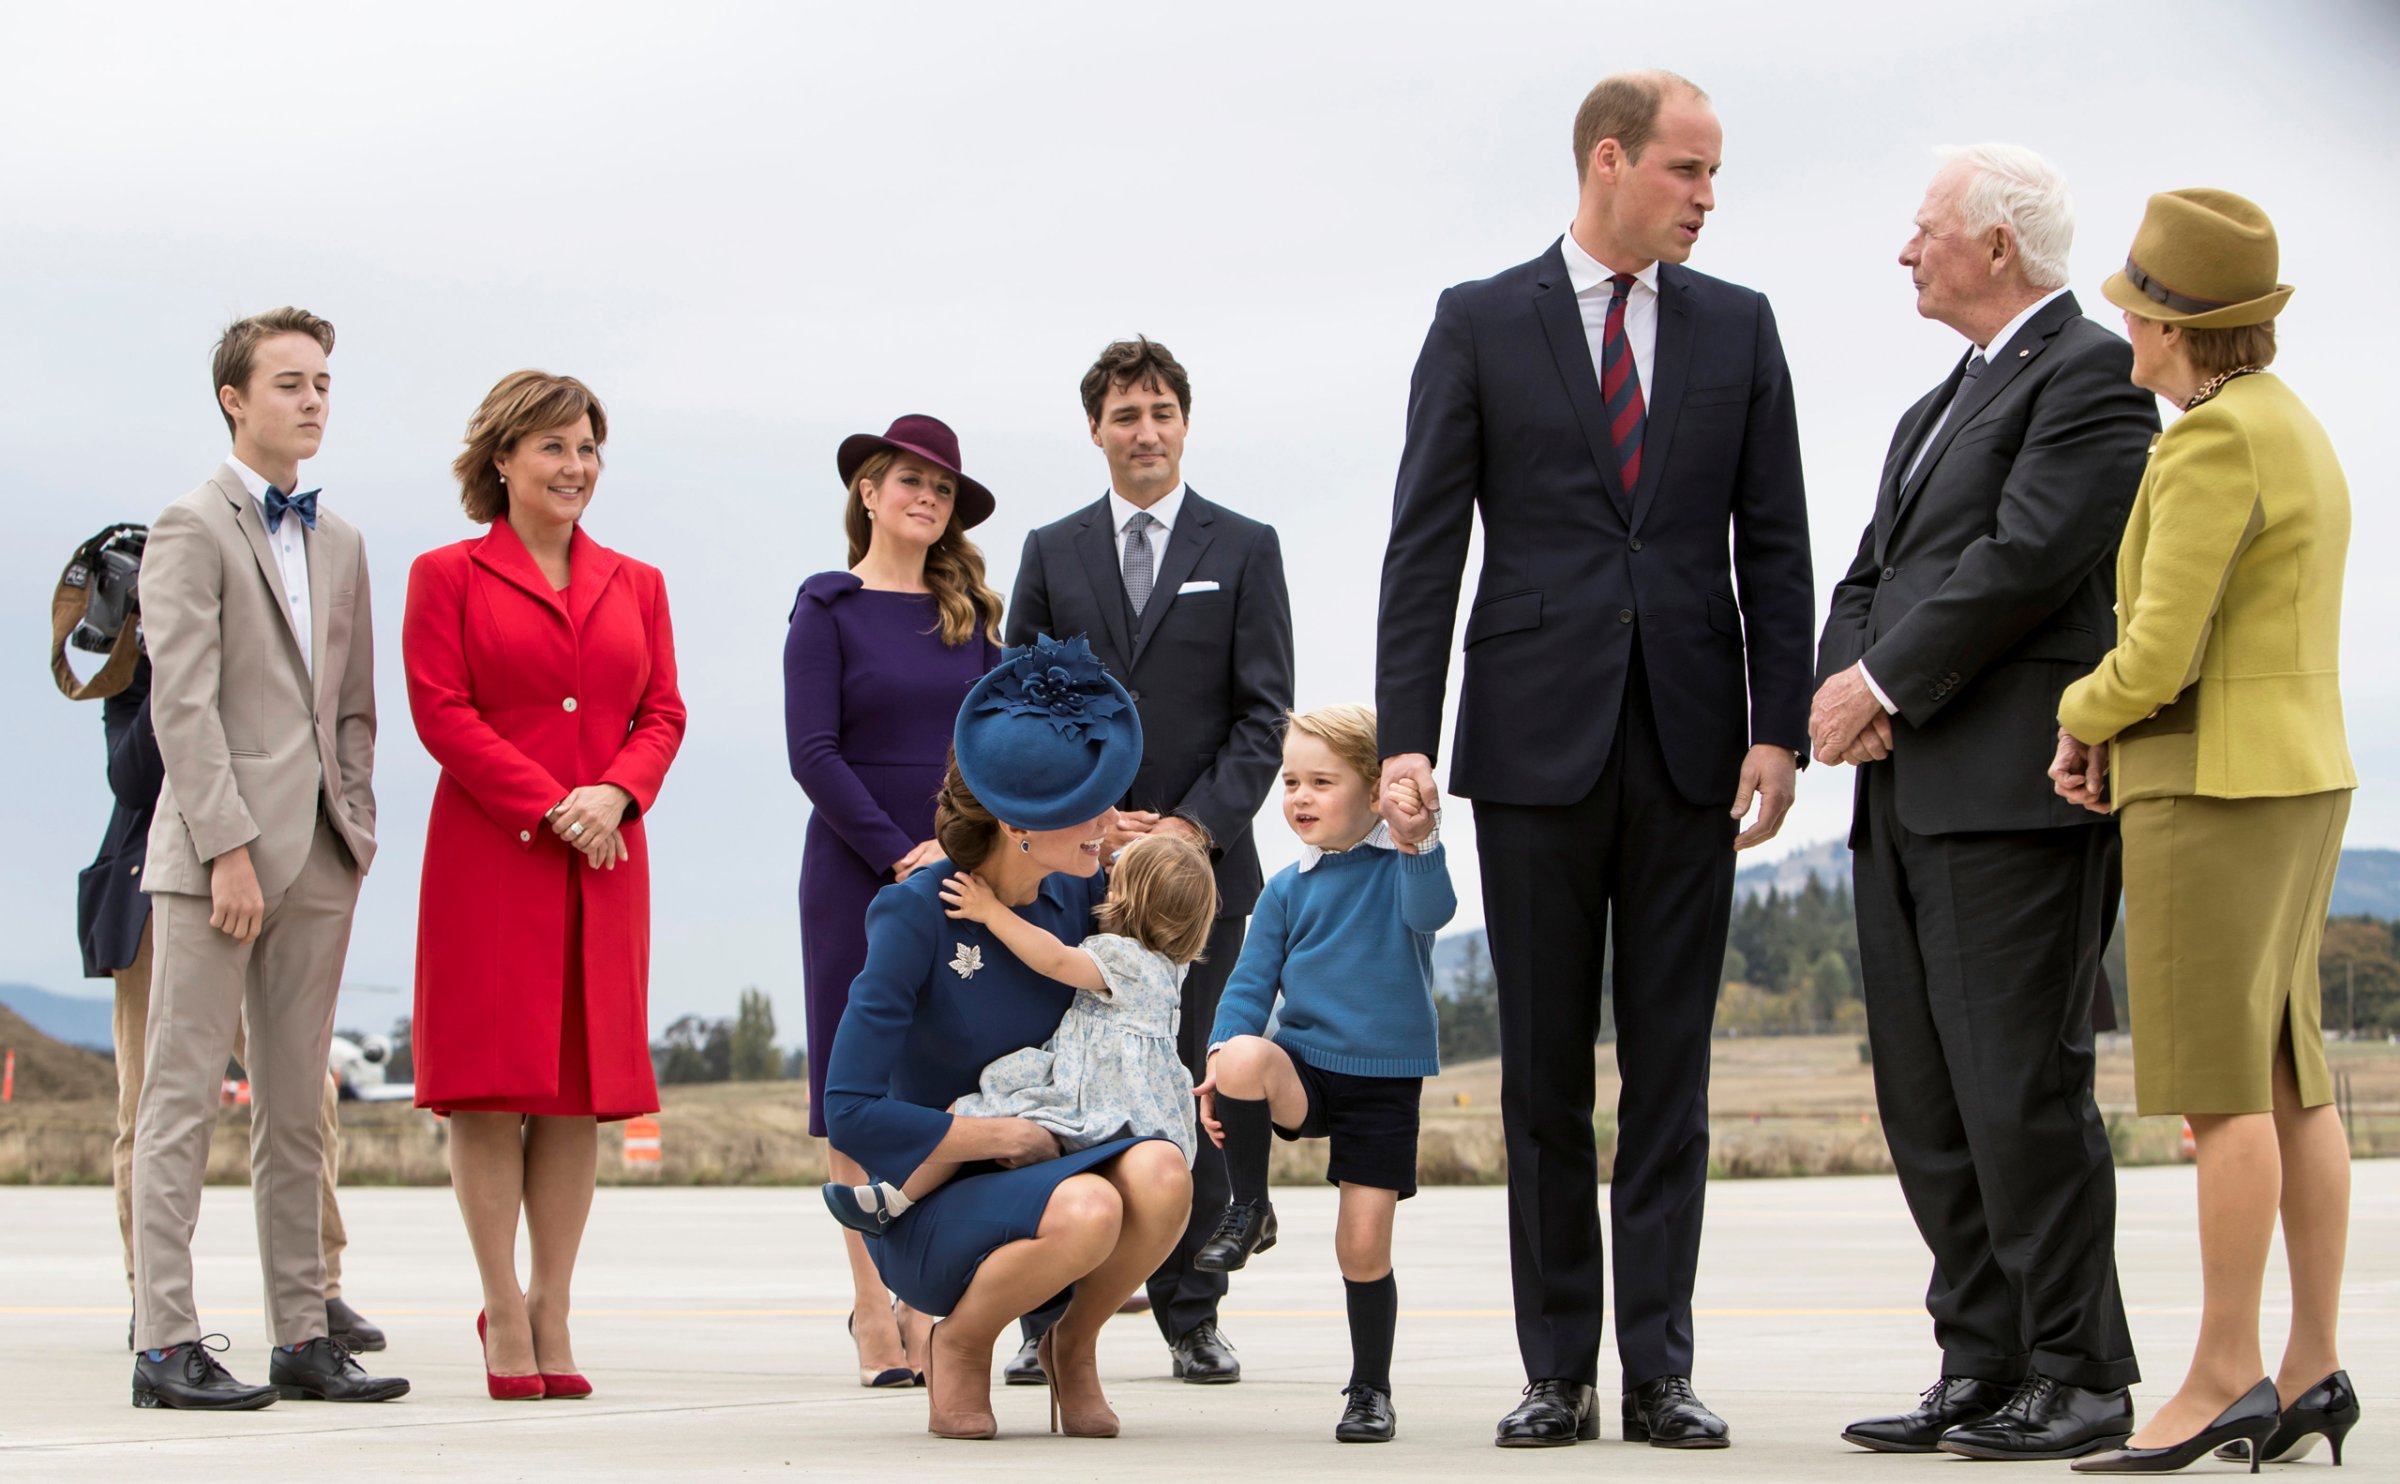 Britain's Prince William, Catherine, Duchess of Cambridge, Prince George and Princess Charlotte arrive at the Victoria International Airport for the start of their eight day royal tour to Canada in Victoria, British Columbia, Canada, September 24, 2016. Also pictured (C, rear) are Canada's Prime Minister Justin Trudeau and his wife Sophie Gregoire Trudeau. REUTERS/Kevin Light TPX IMAGES OF THE DAY - RTSPALI